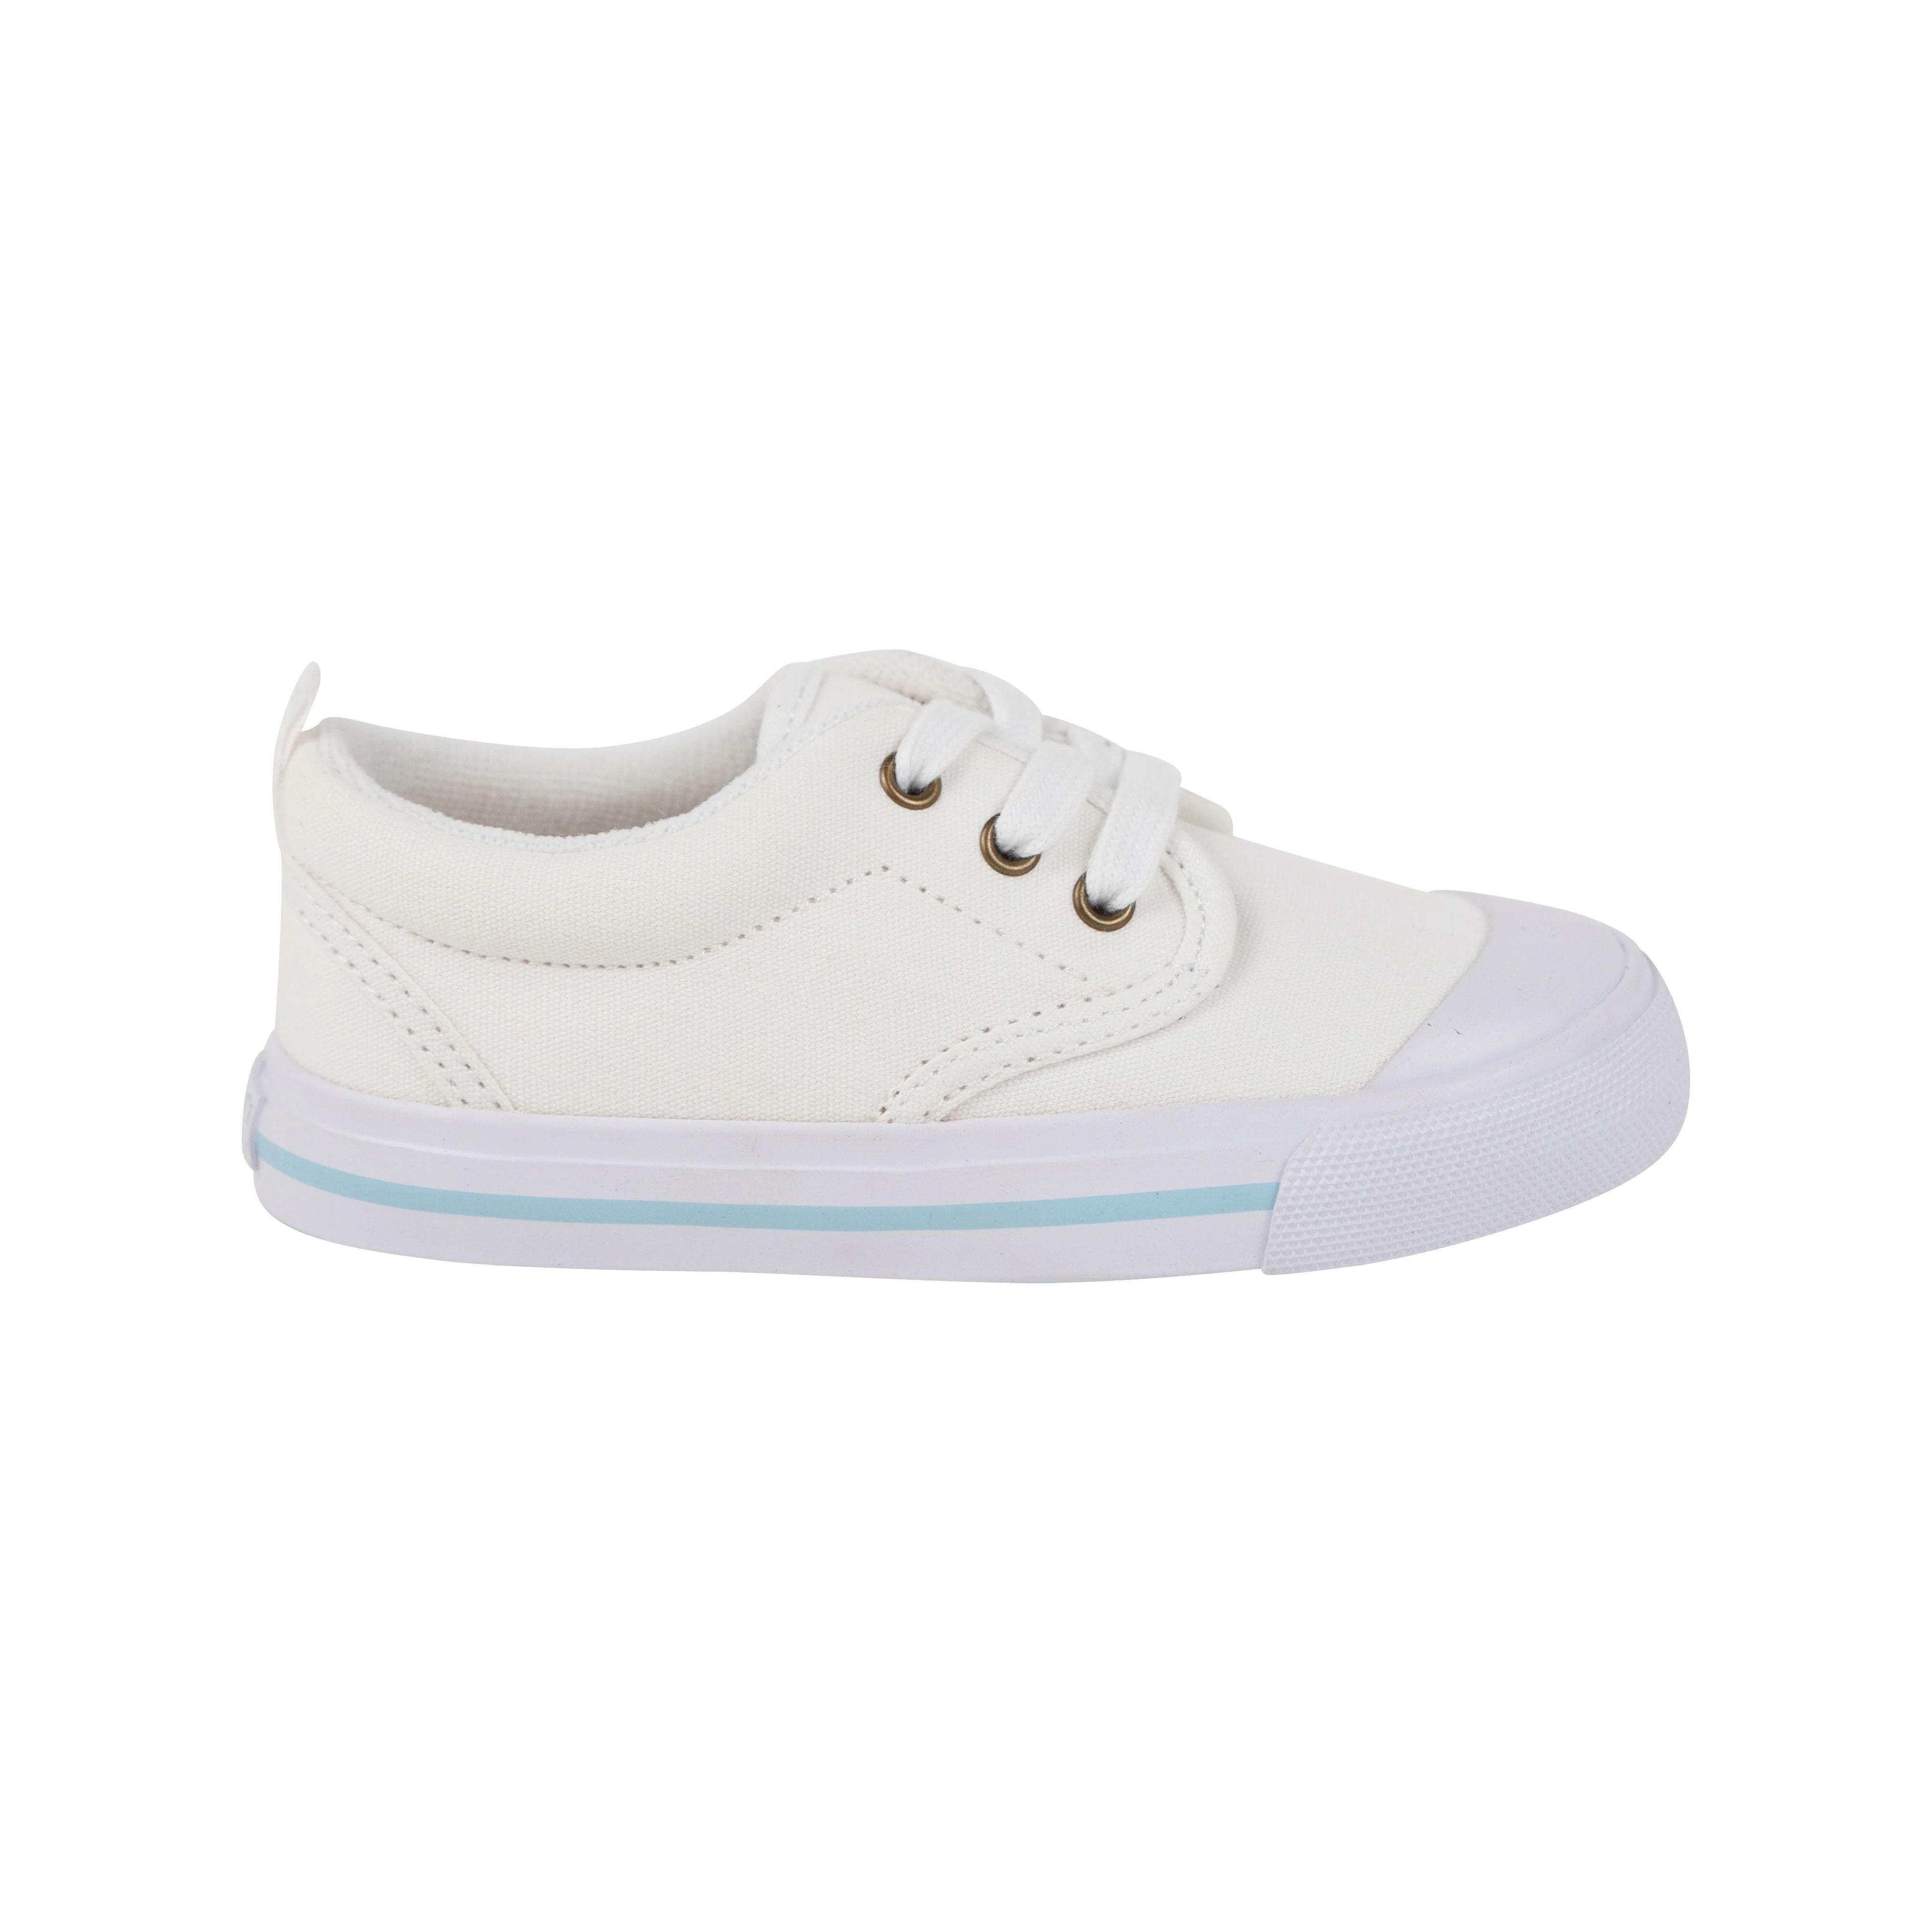 Prep Step Sneakers - Worth Avenue White with Buckhead Blue Stripe | The Beaufort Bonnet Company